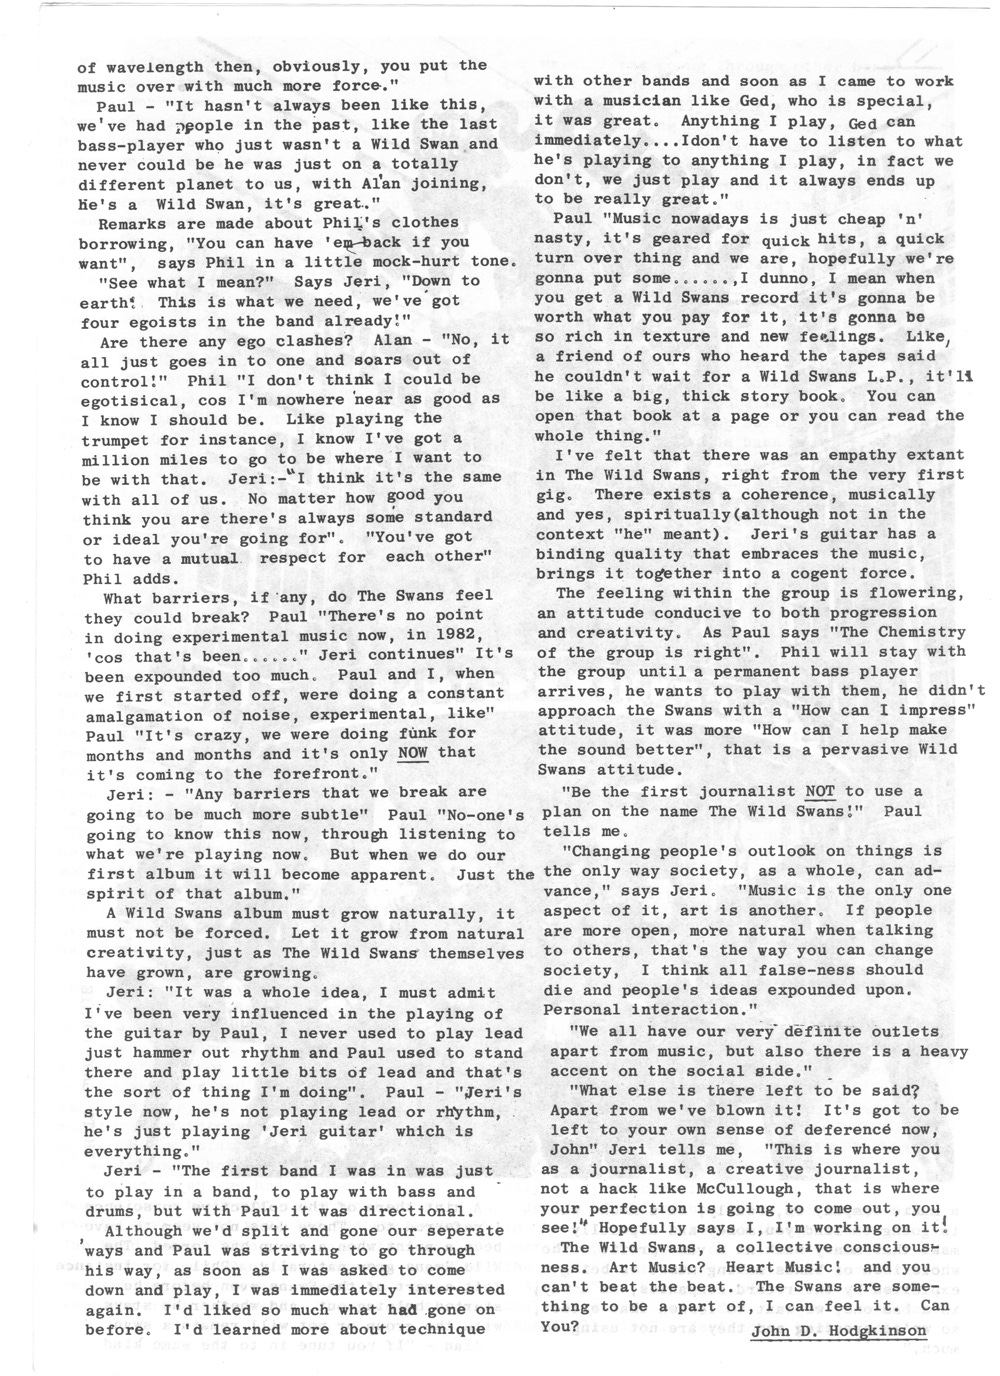 Page 3 of the original article.